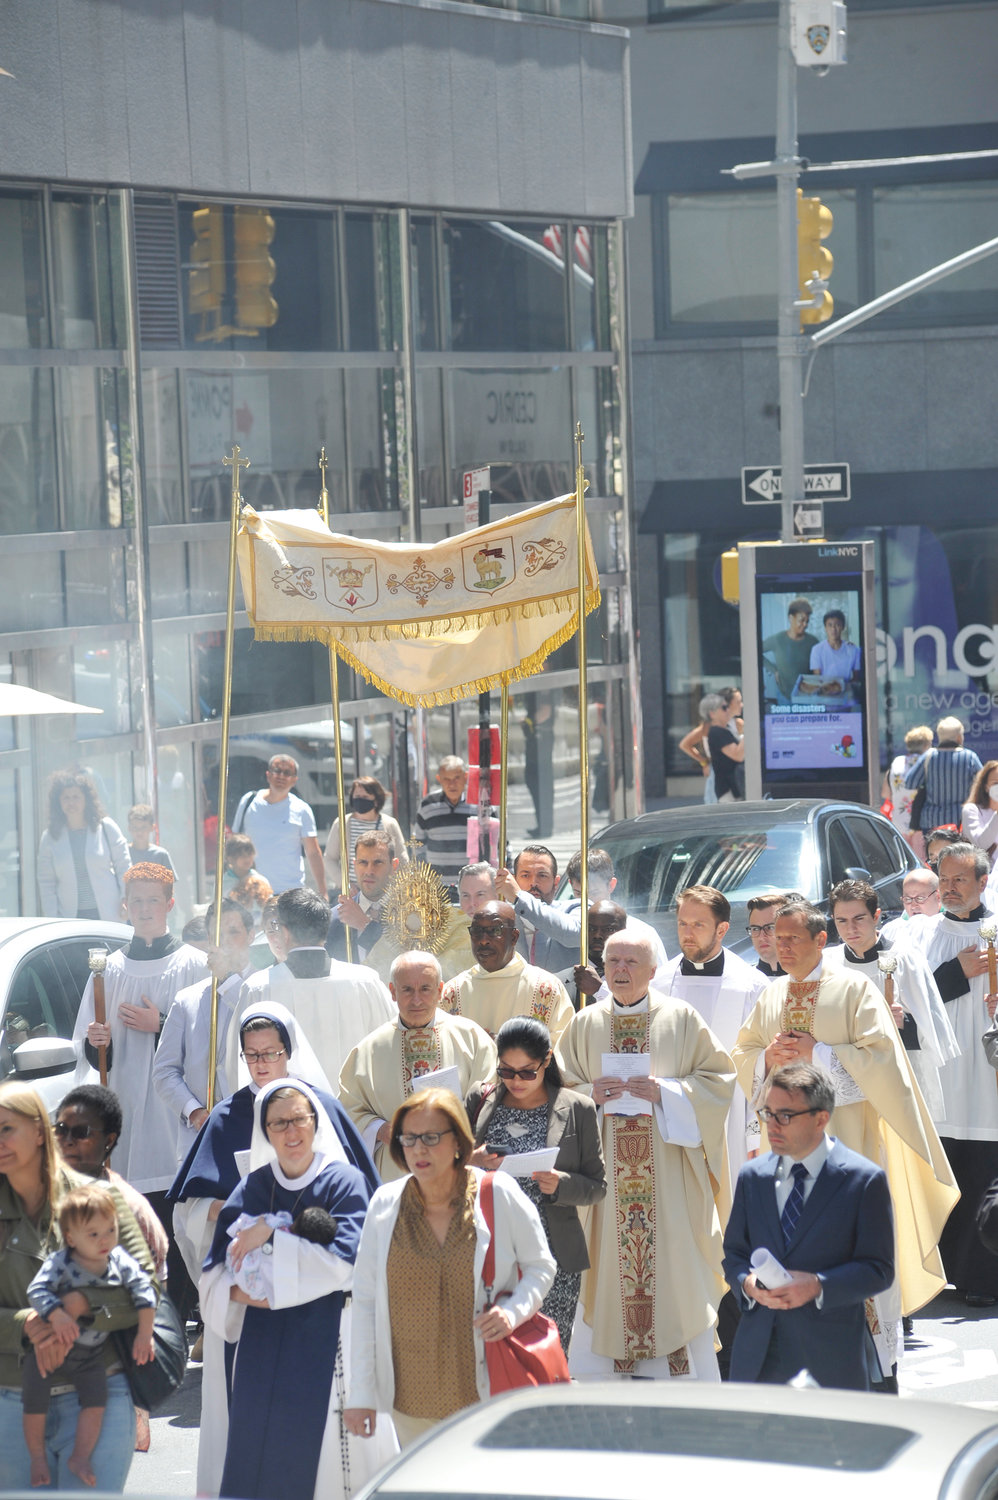 The faithful participated through prayerful witness throughout the procession, which wound around the perimeter of the cathedral and concluded with Benediction on the front steps at the cathedral’s bronze doors.